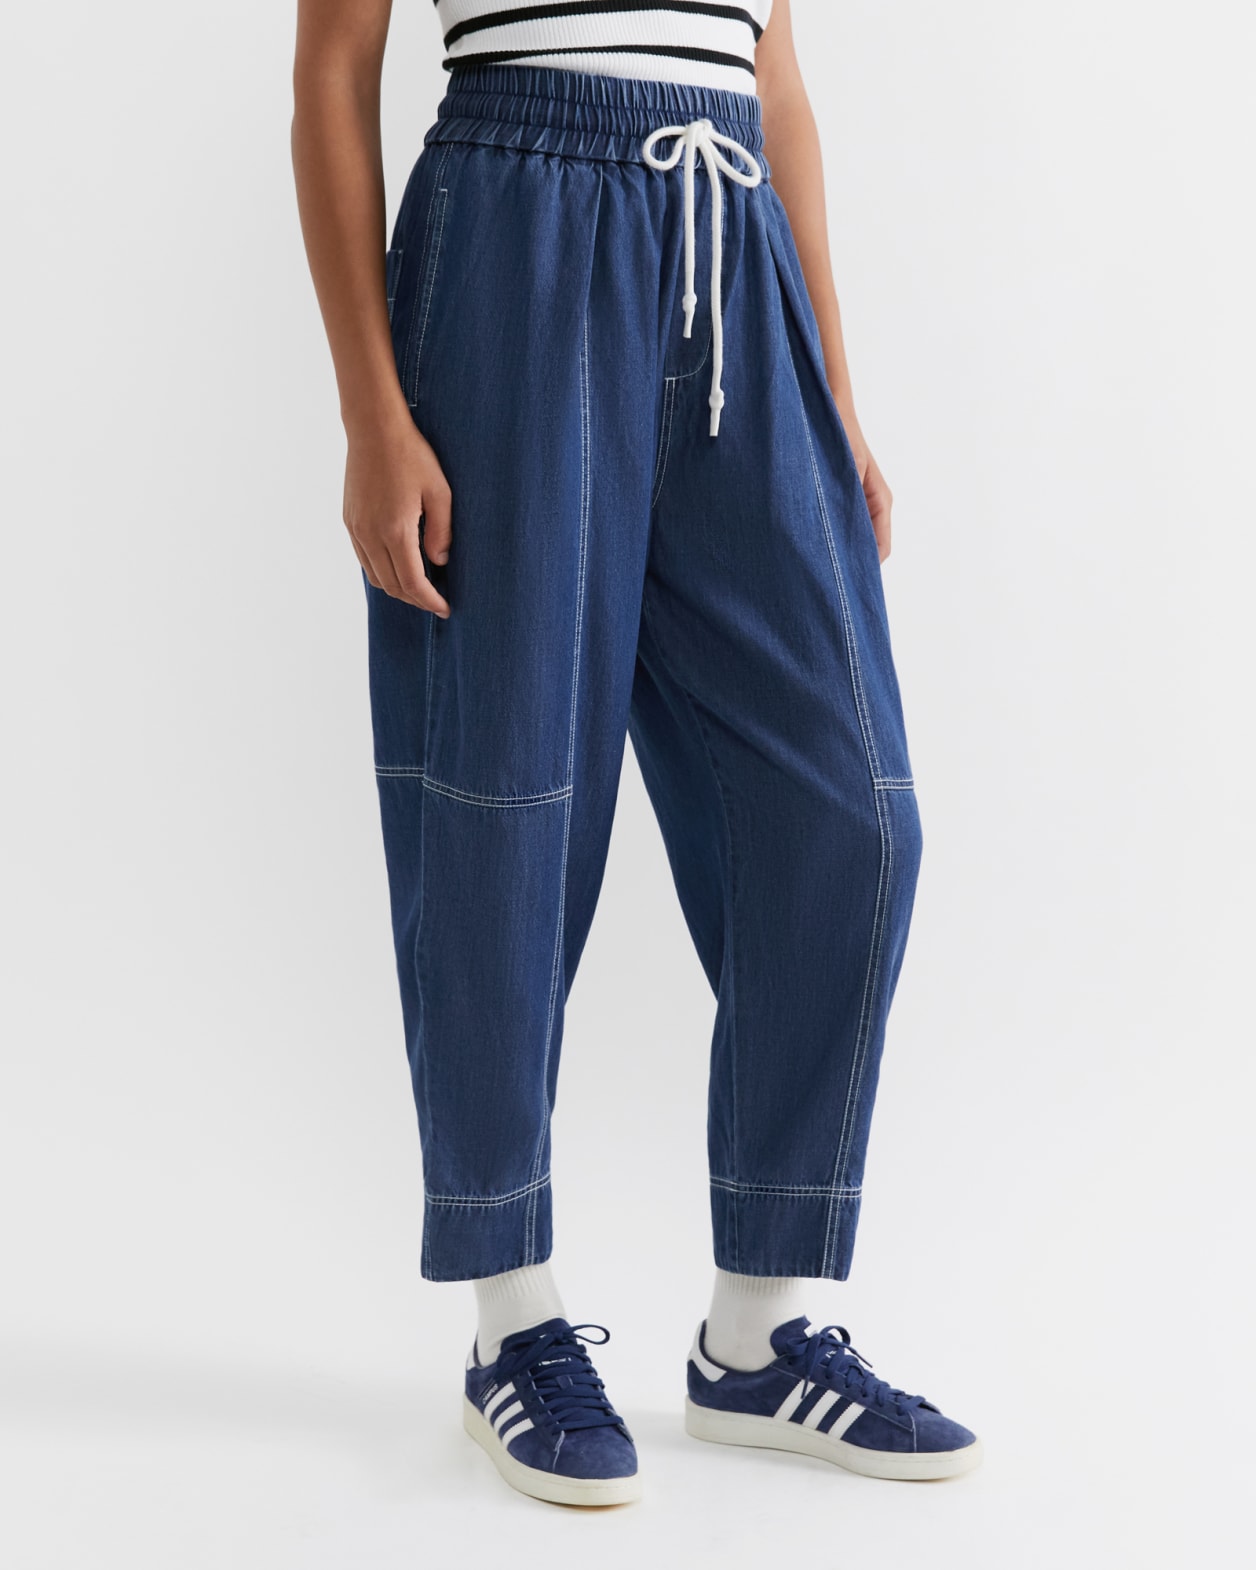 Nyra Relaxed Denim Pant in RAW WASH